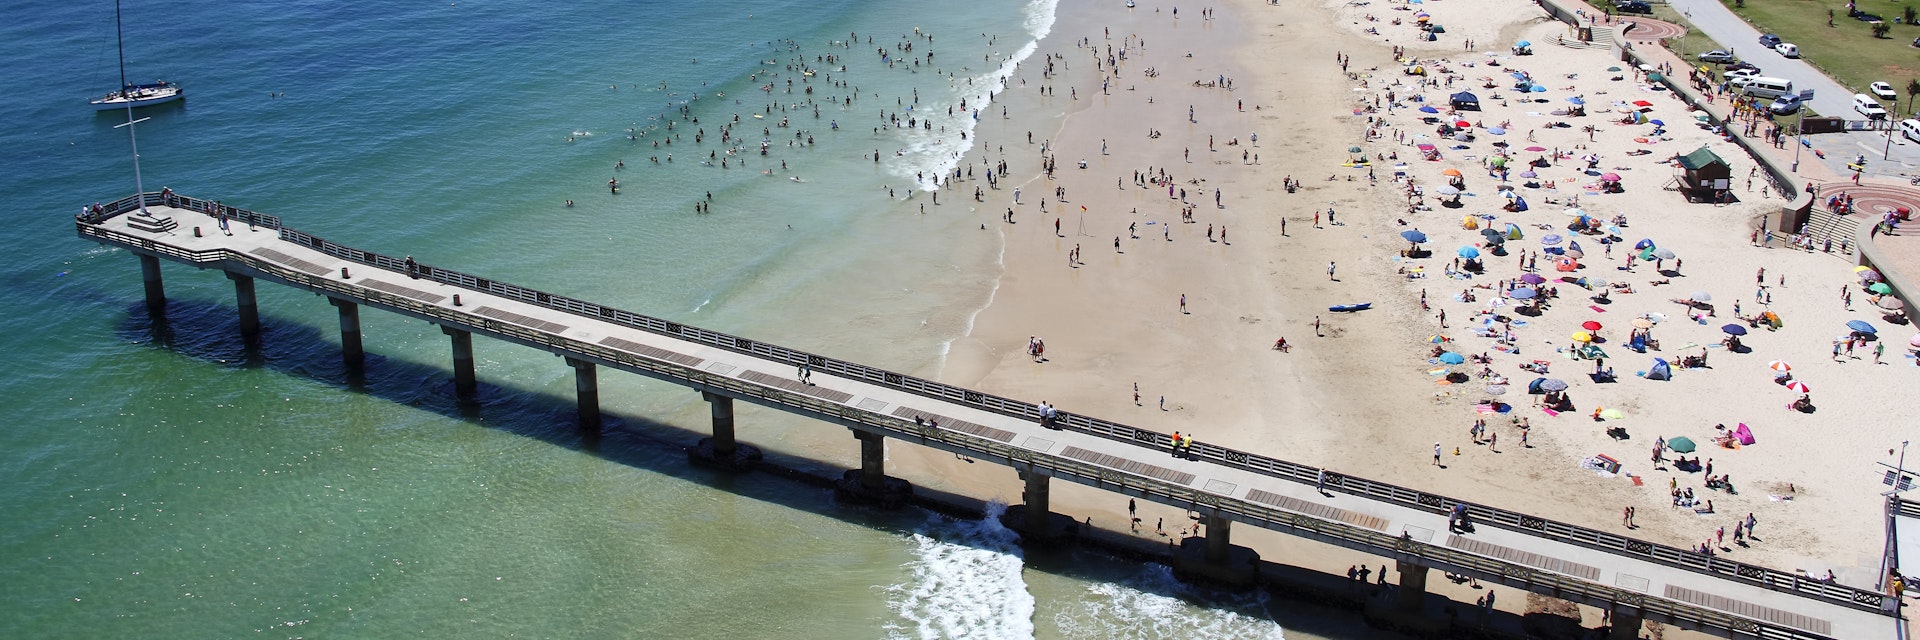 Aerial view of Summerstrand Beach, Port Elizabeth, Eastern Cape Province, South Africa